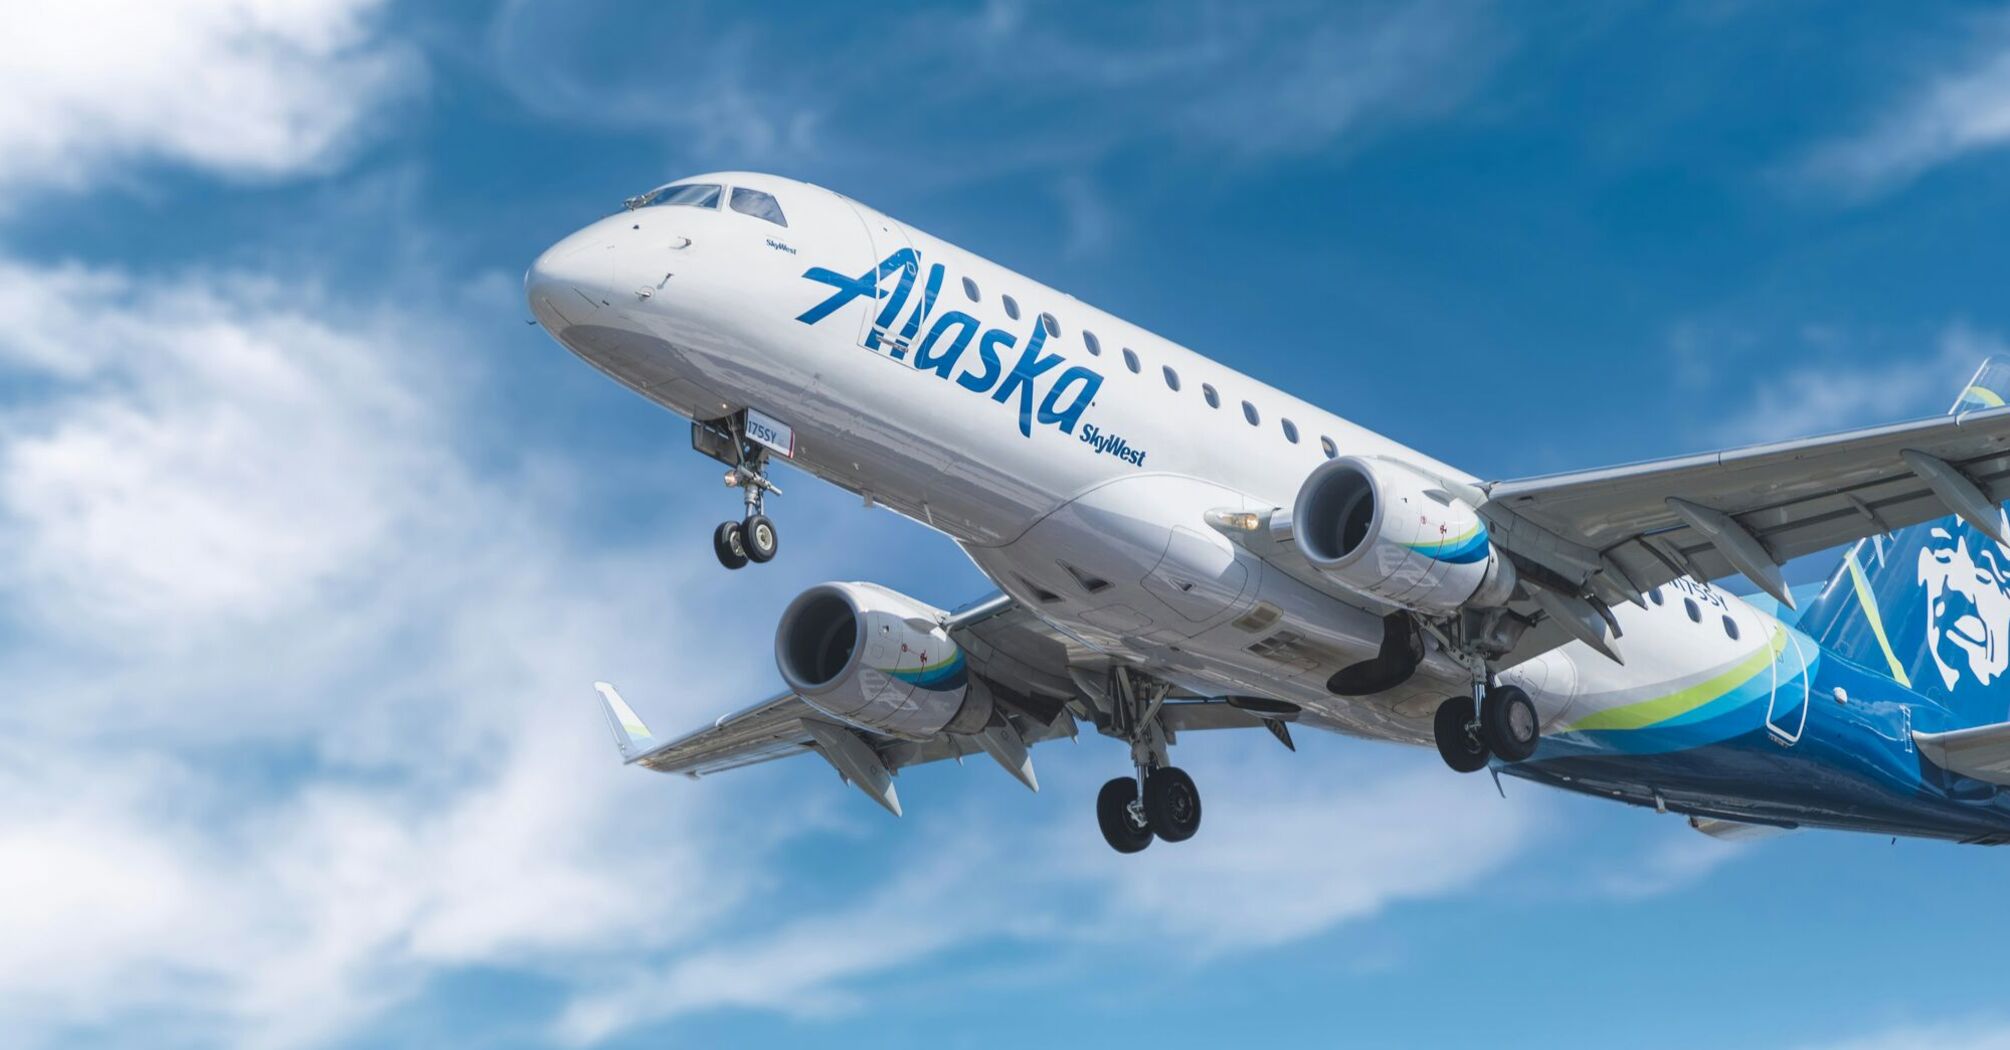 Alaska Airlines aircraft ascending in a clear blue sky